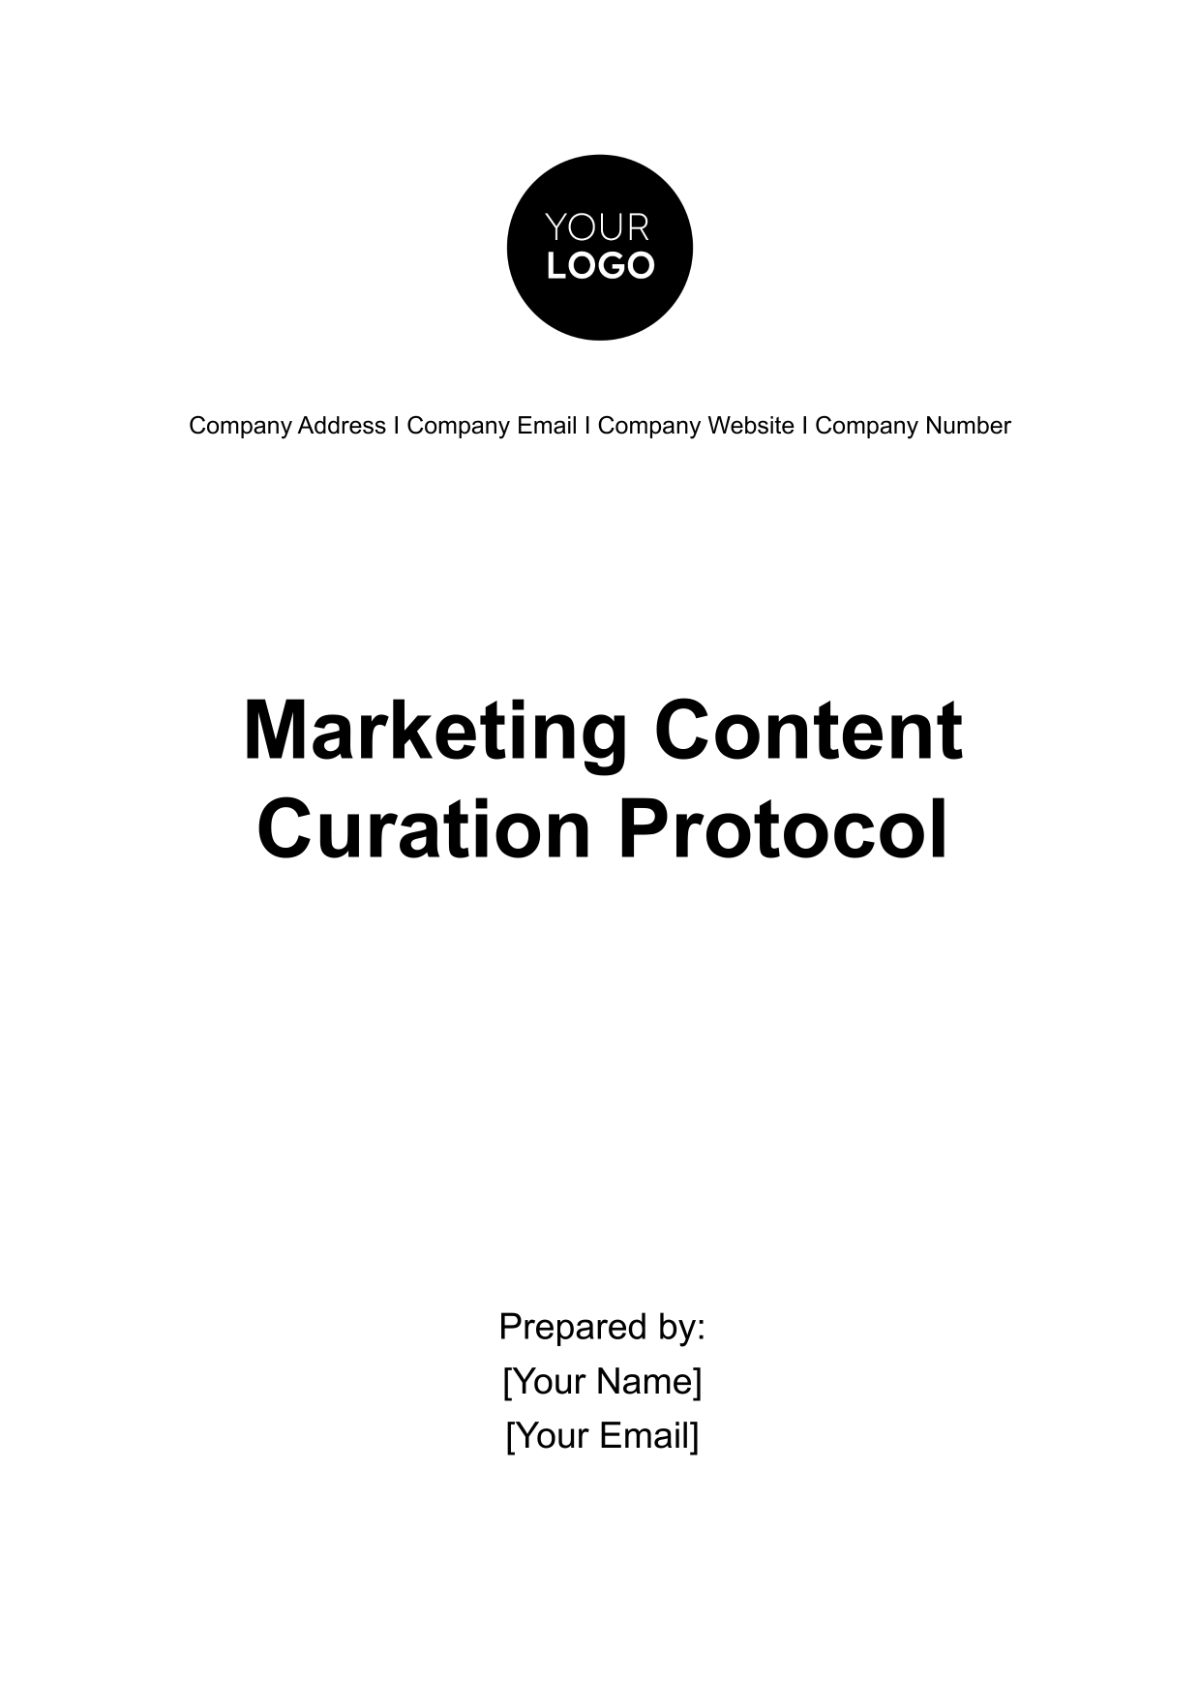 Free Marketing Content Curation Protocol Template